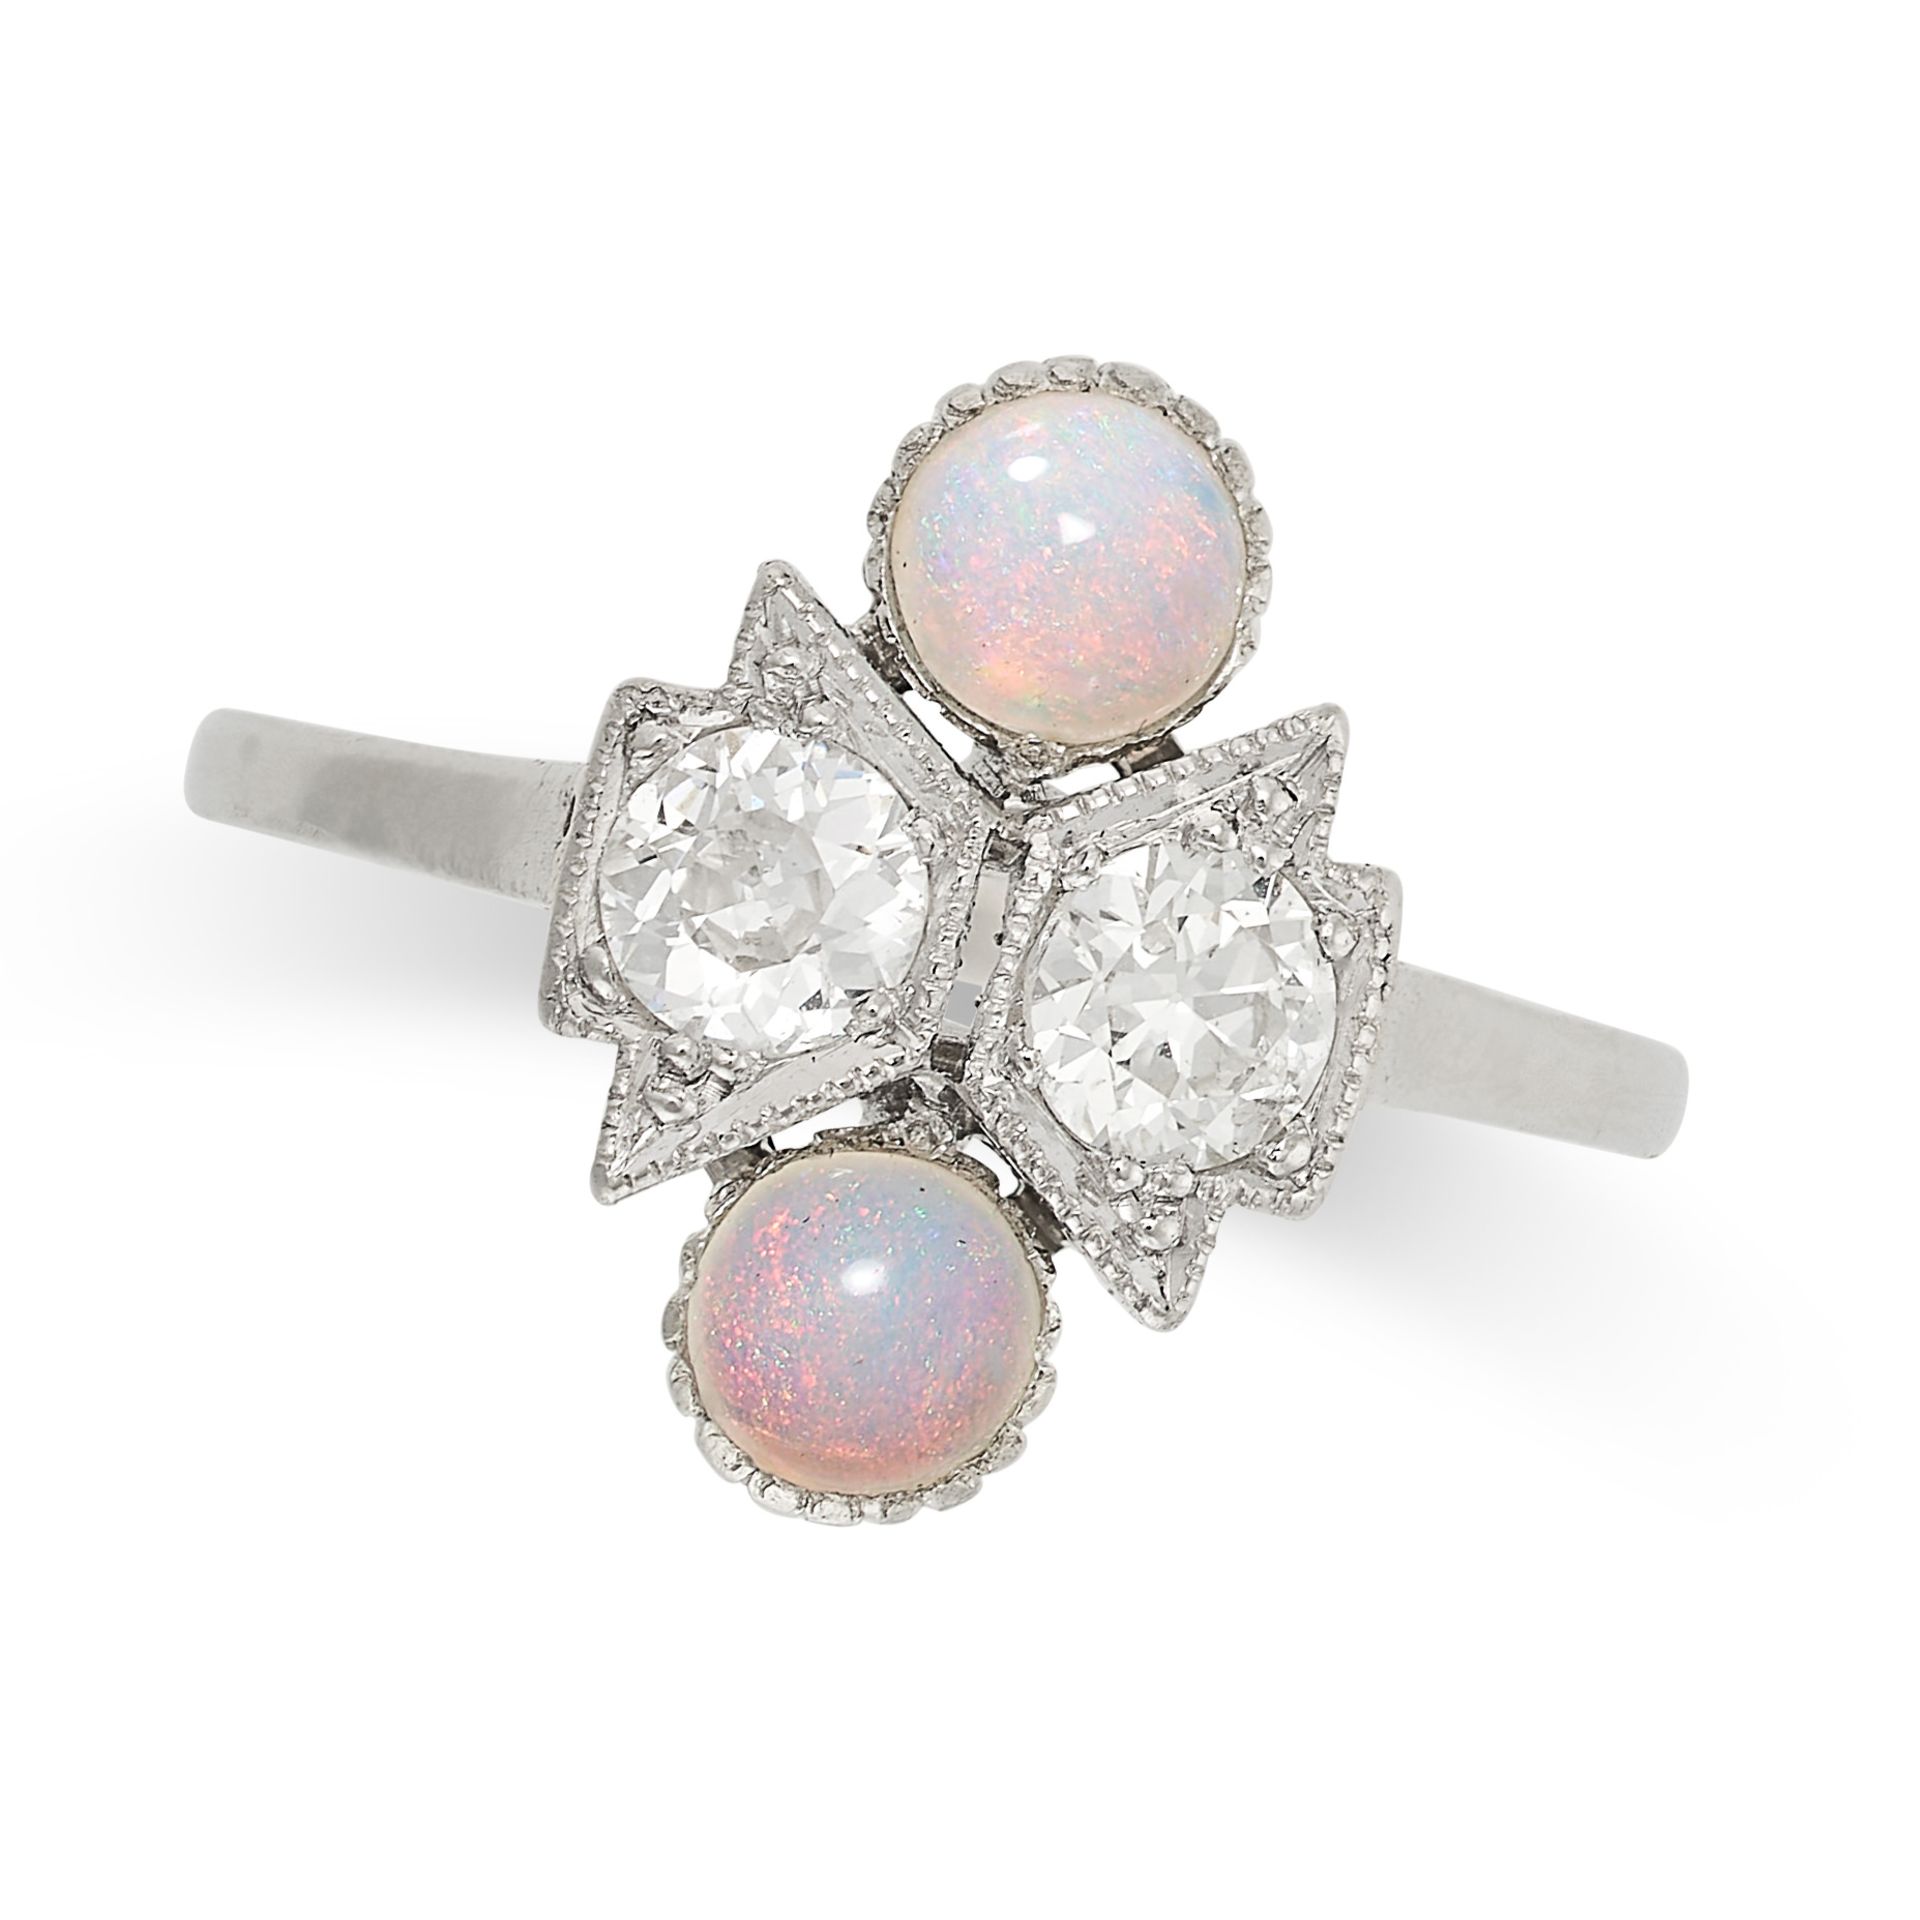 AN OPAL AND DIAMOND DRESS RING in platinum, set with two cabochon opals and two old cut diamonds,